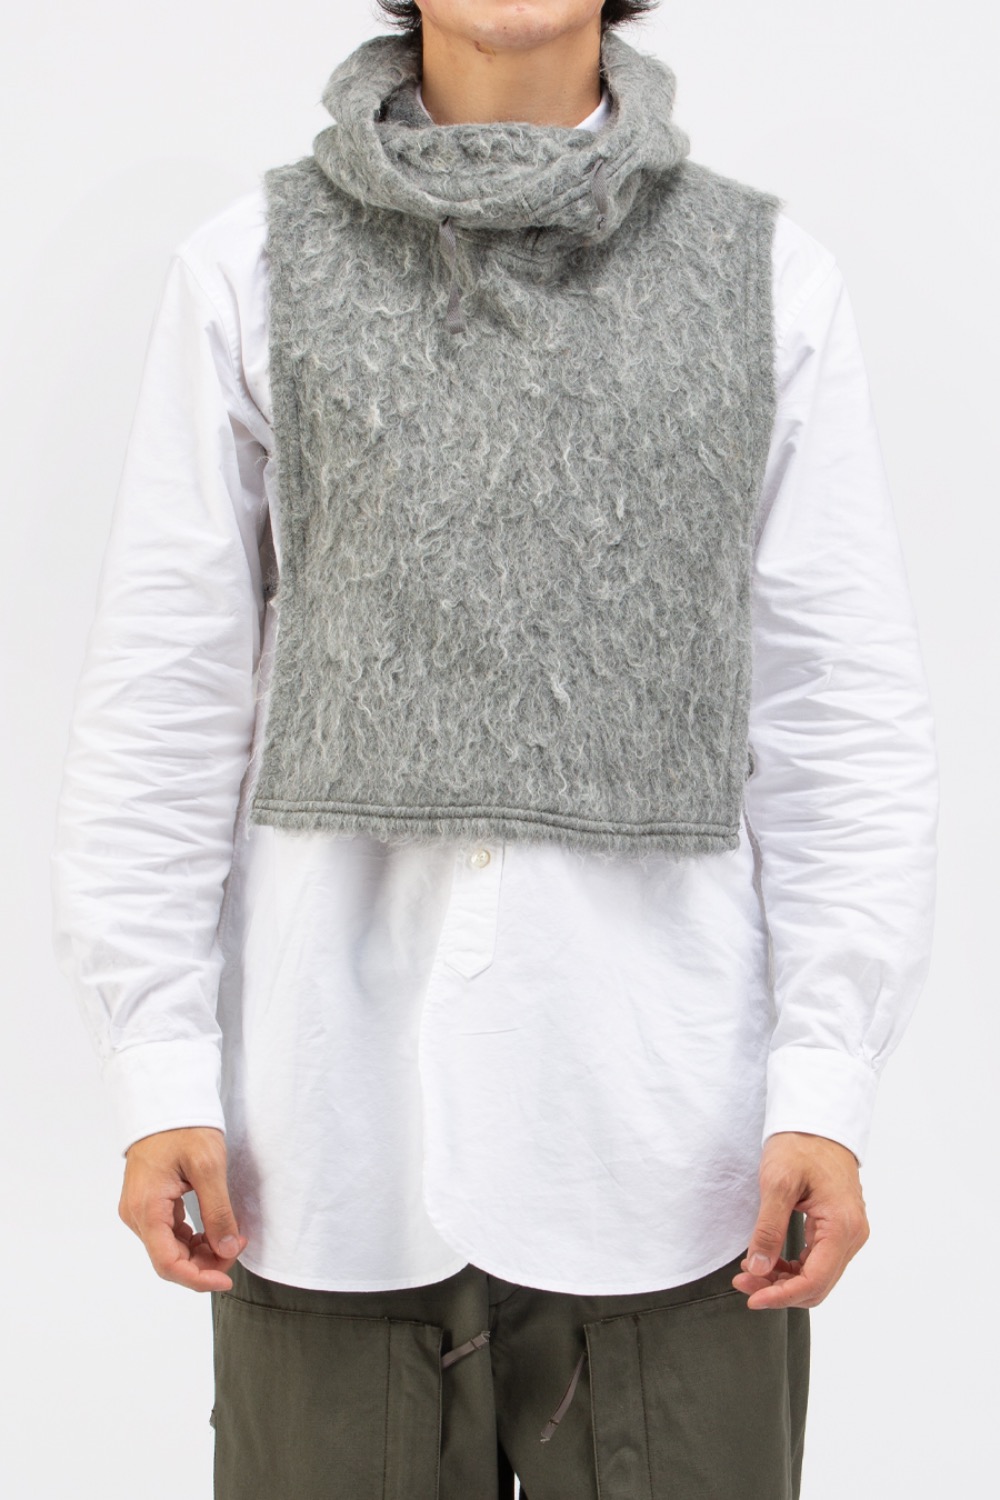 HOODED INTERLINER HEATHER GREY SOLID MOHAIR